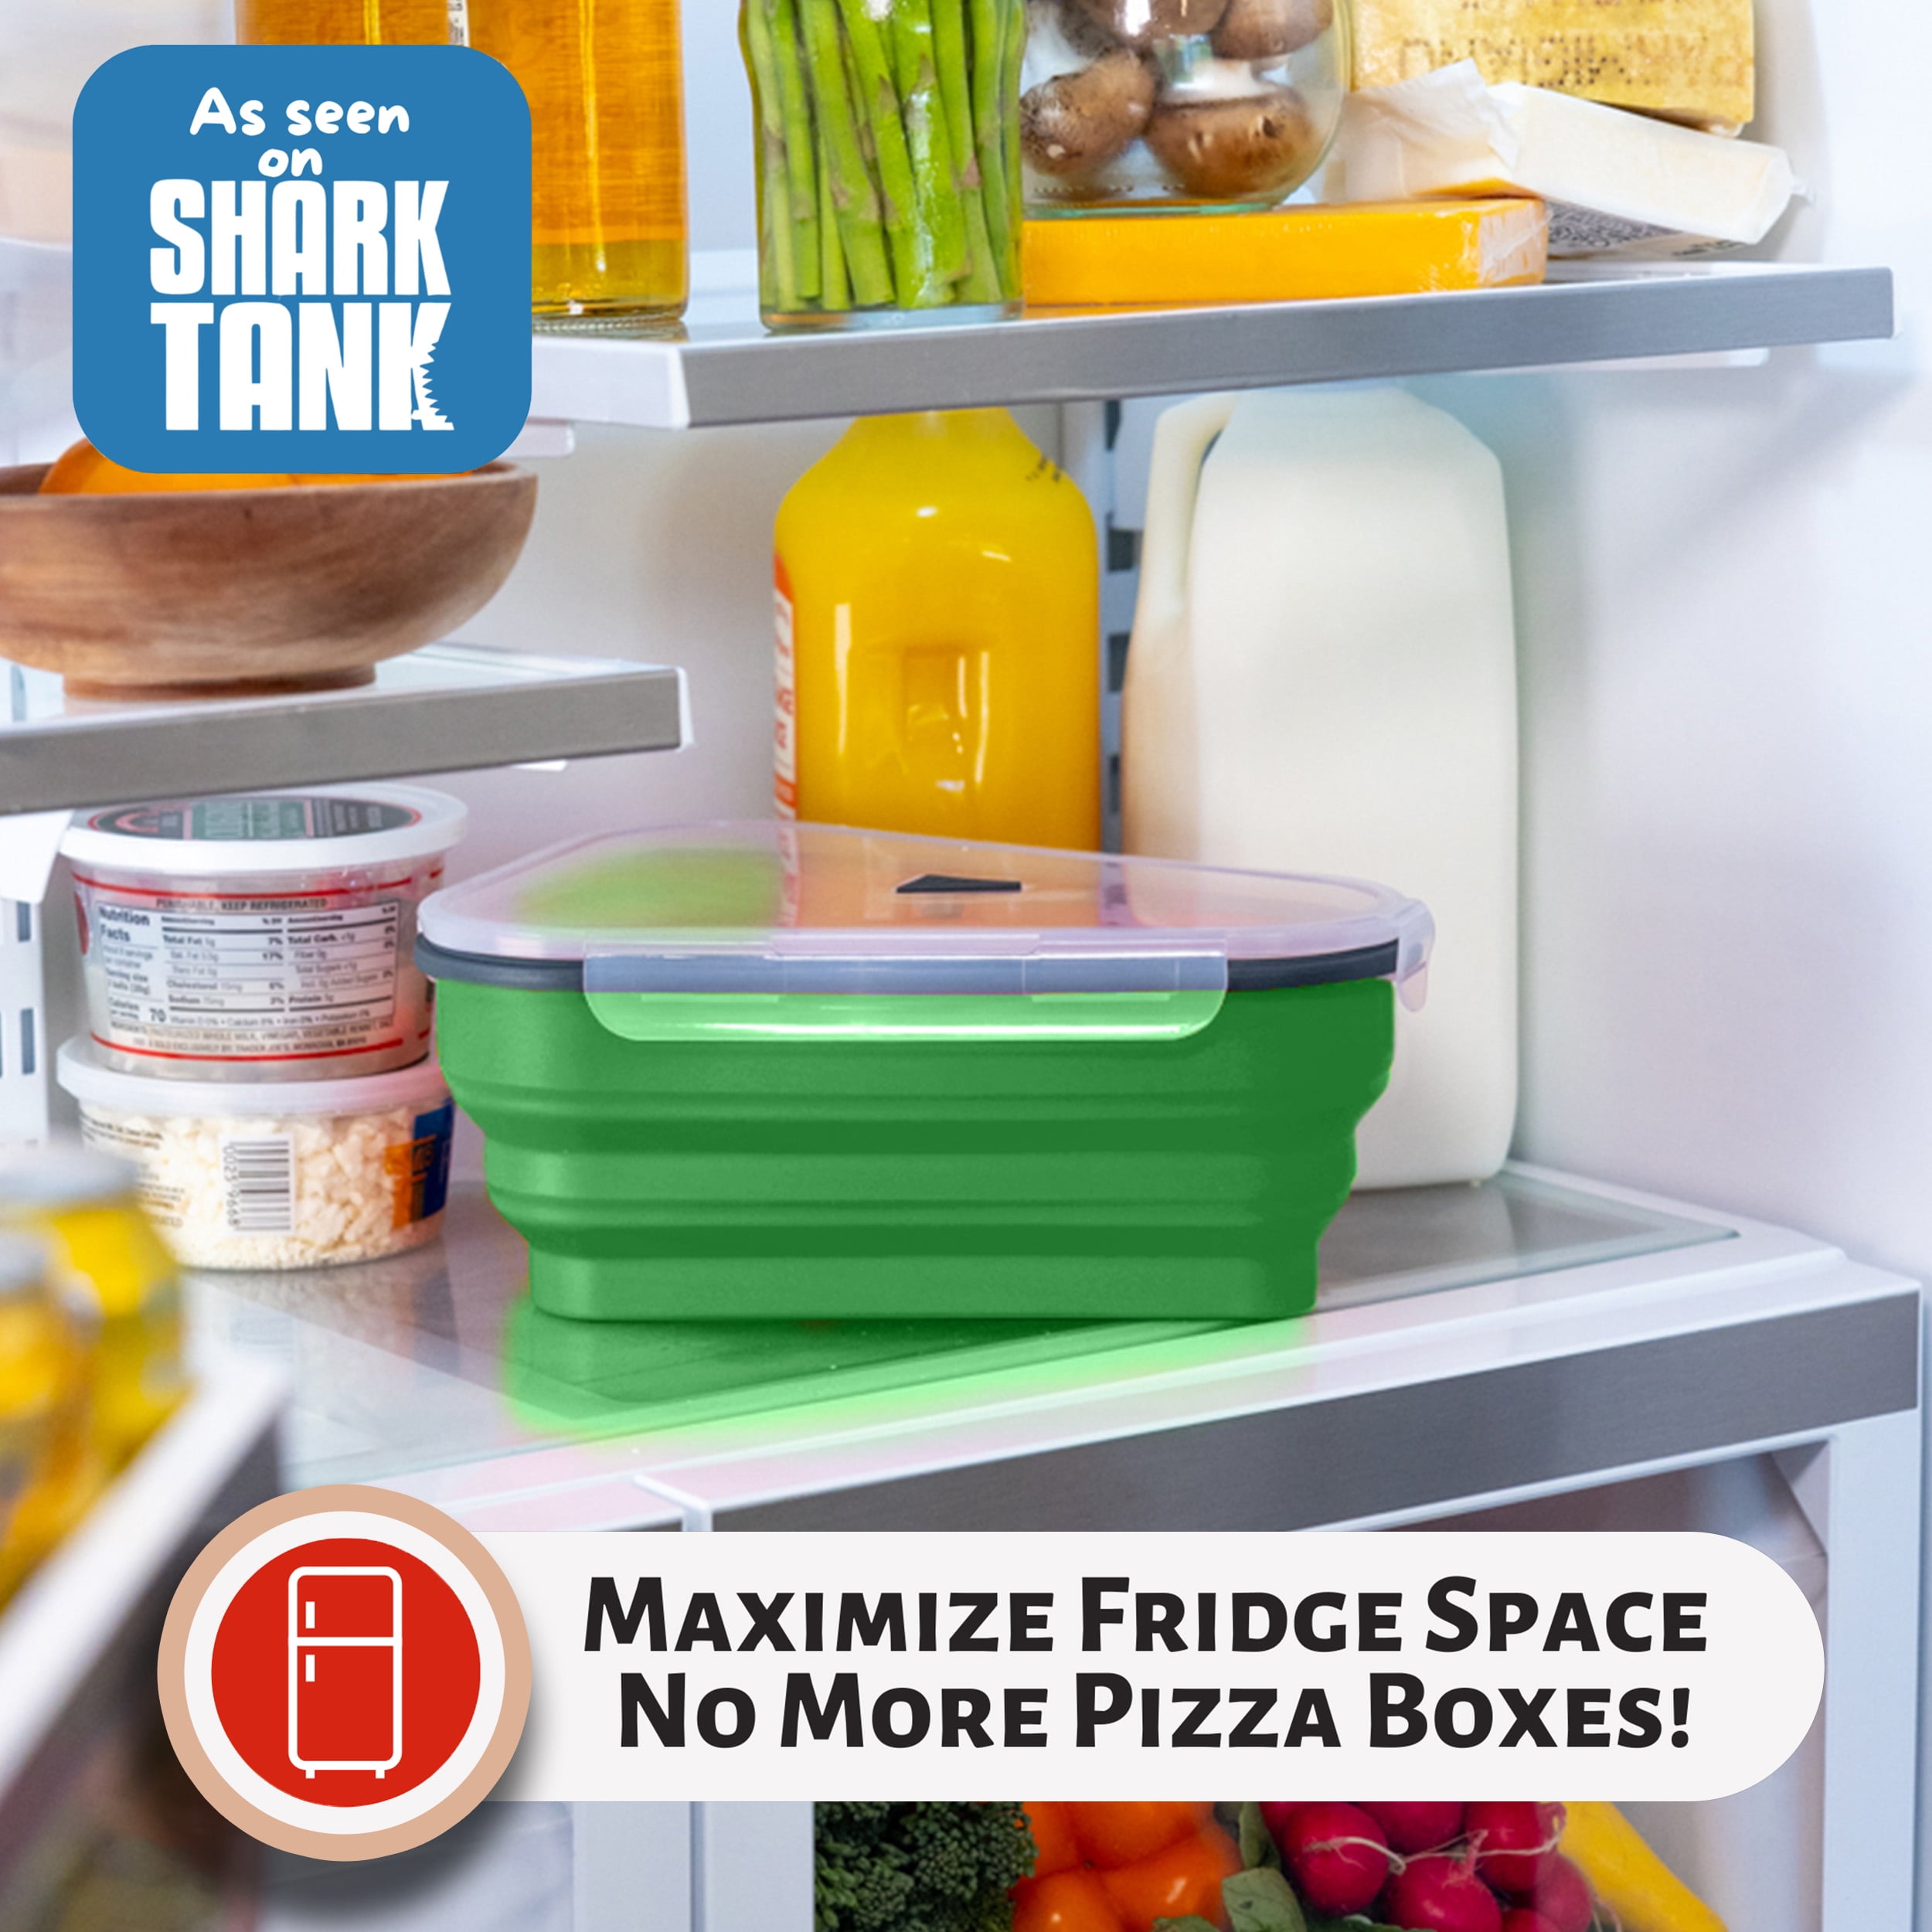 Hot Selling Pizza Pie Slice Container, Snack Bread Food Storage